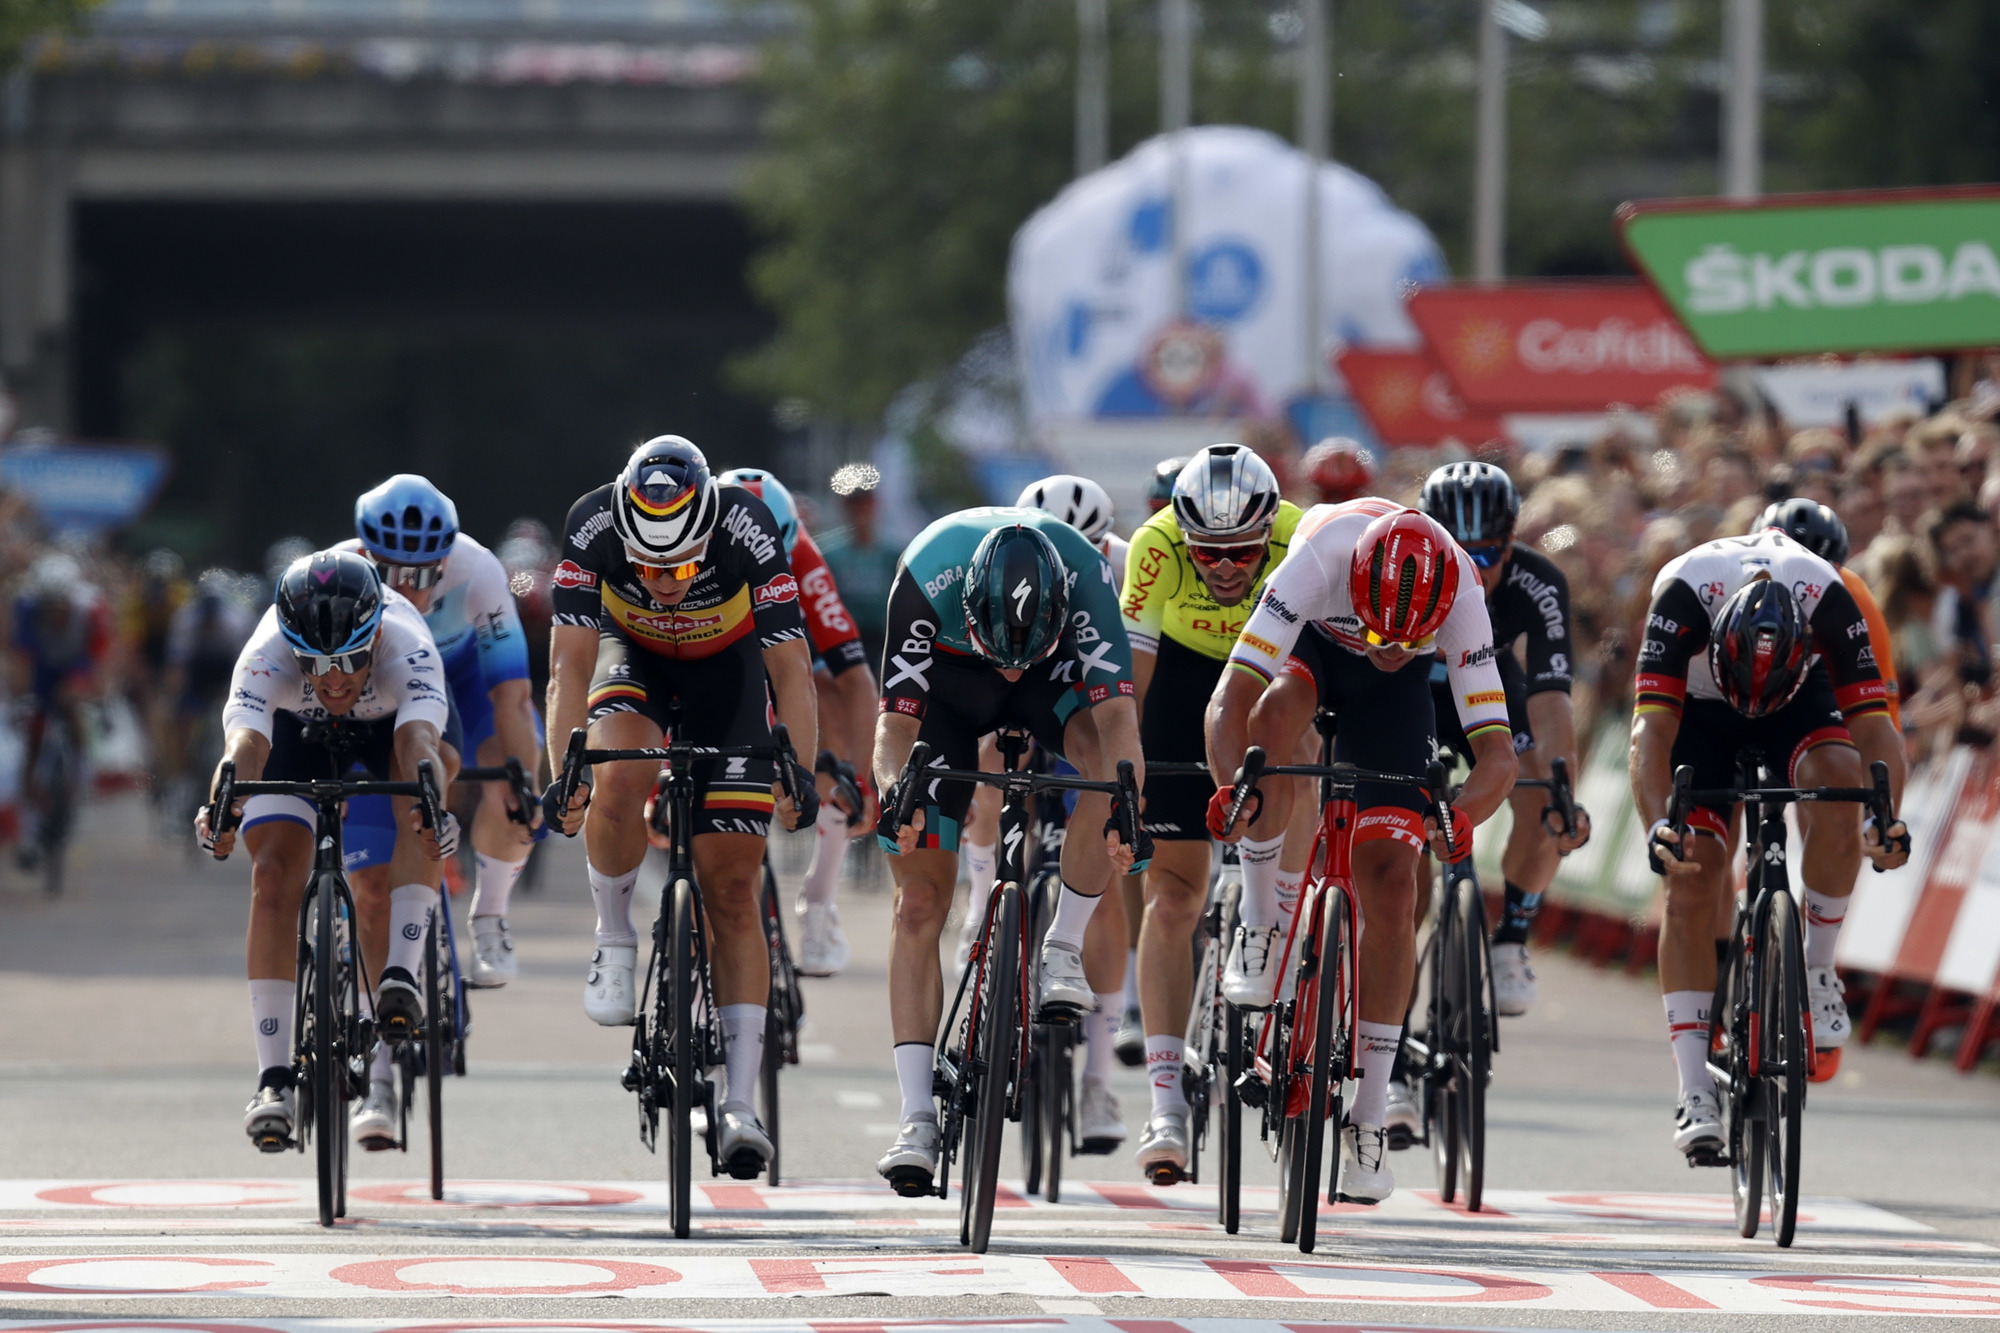 Vuelta a Espana stage 3 Live - Another sprint opportunity in the Netherlands